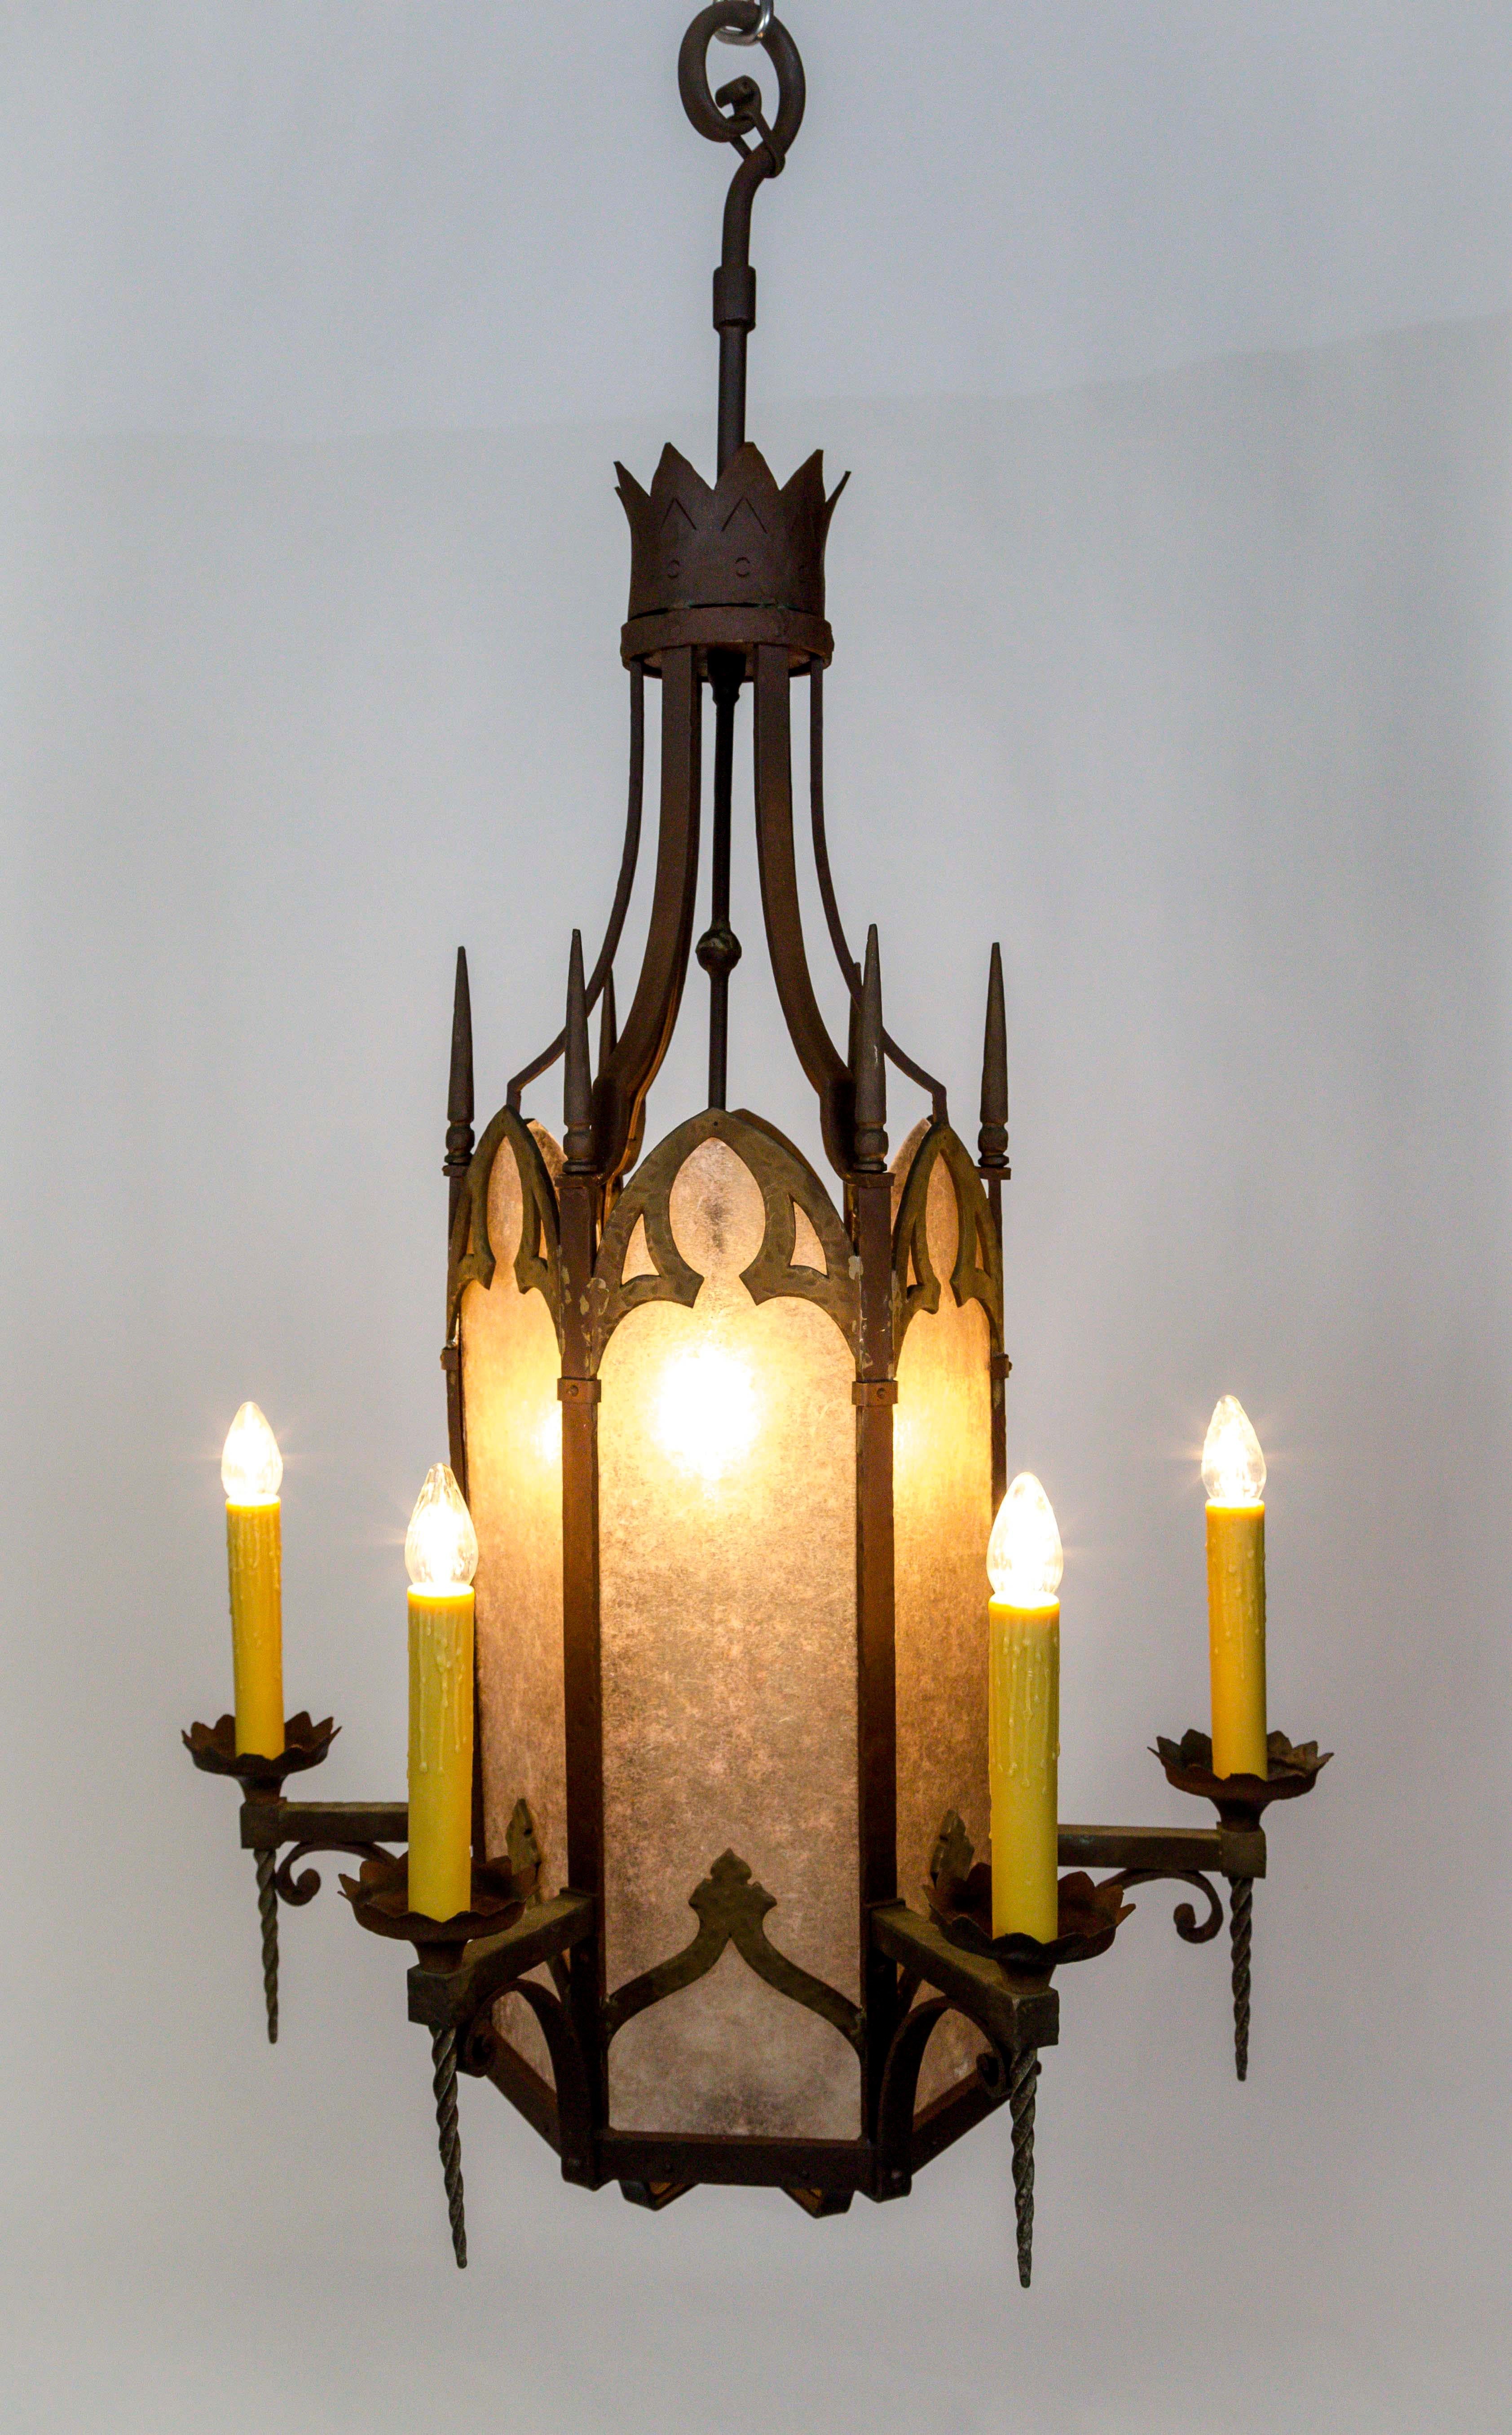 A pair of remarkable Renaissance Revival style lanterns made for a church in Oakland, California, circa 1910, shown here with and without the mica. They are hexagonal prism shaped, made of bronze and steel, with new mica 